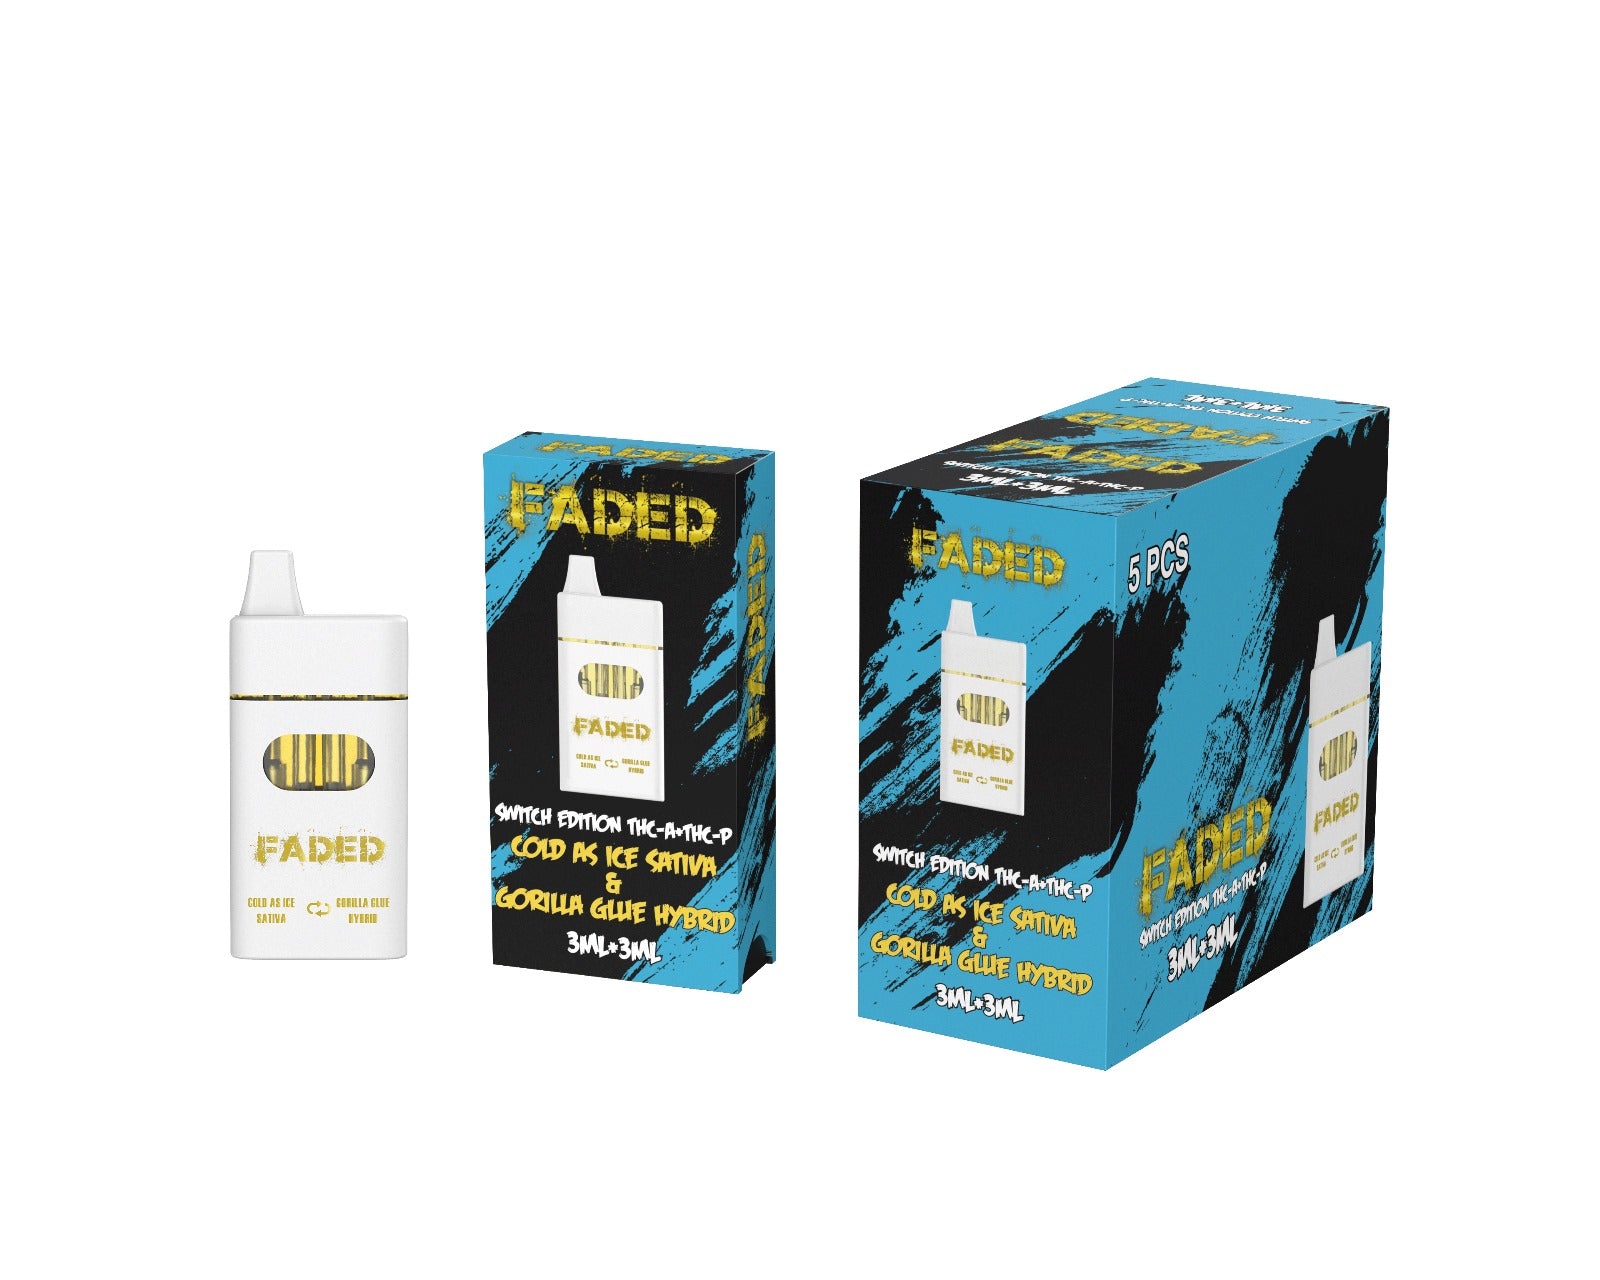 FADED SWITCH EDITION THC-A & THC-P 6ML DISPOSABLES | COLD AS ICE SATIVA & GORILLA GLUE HYBIRD